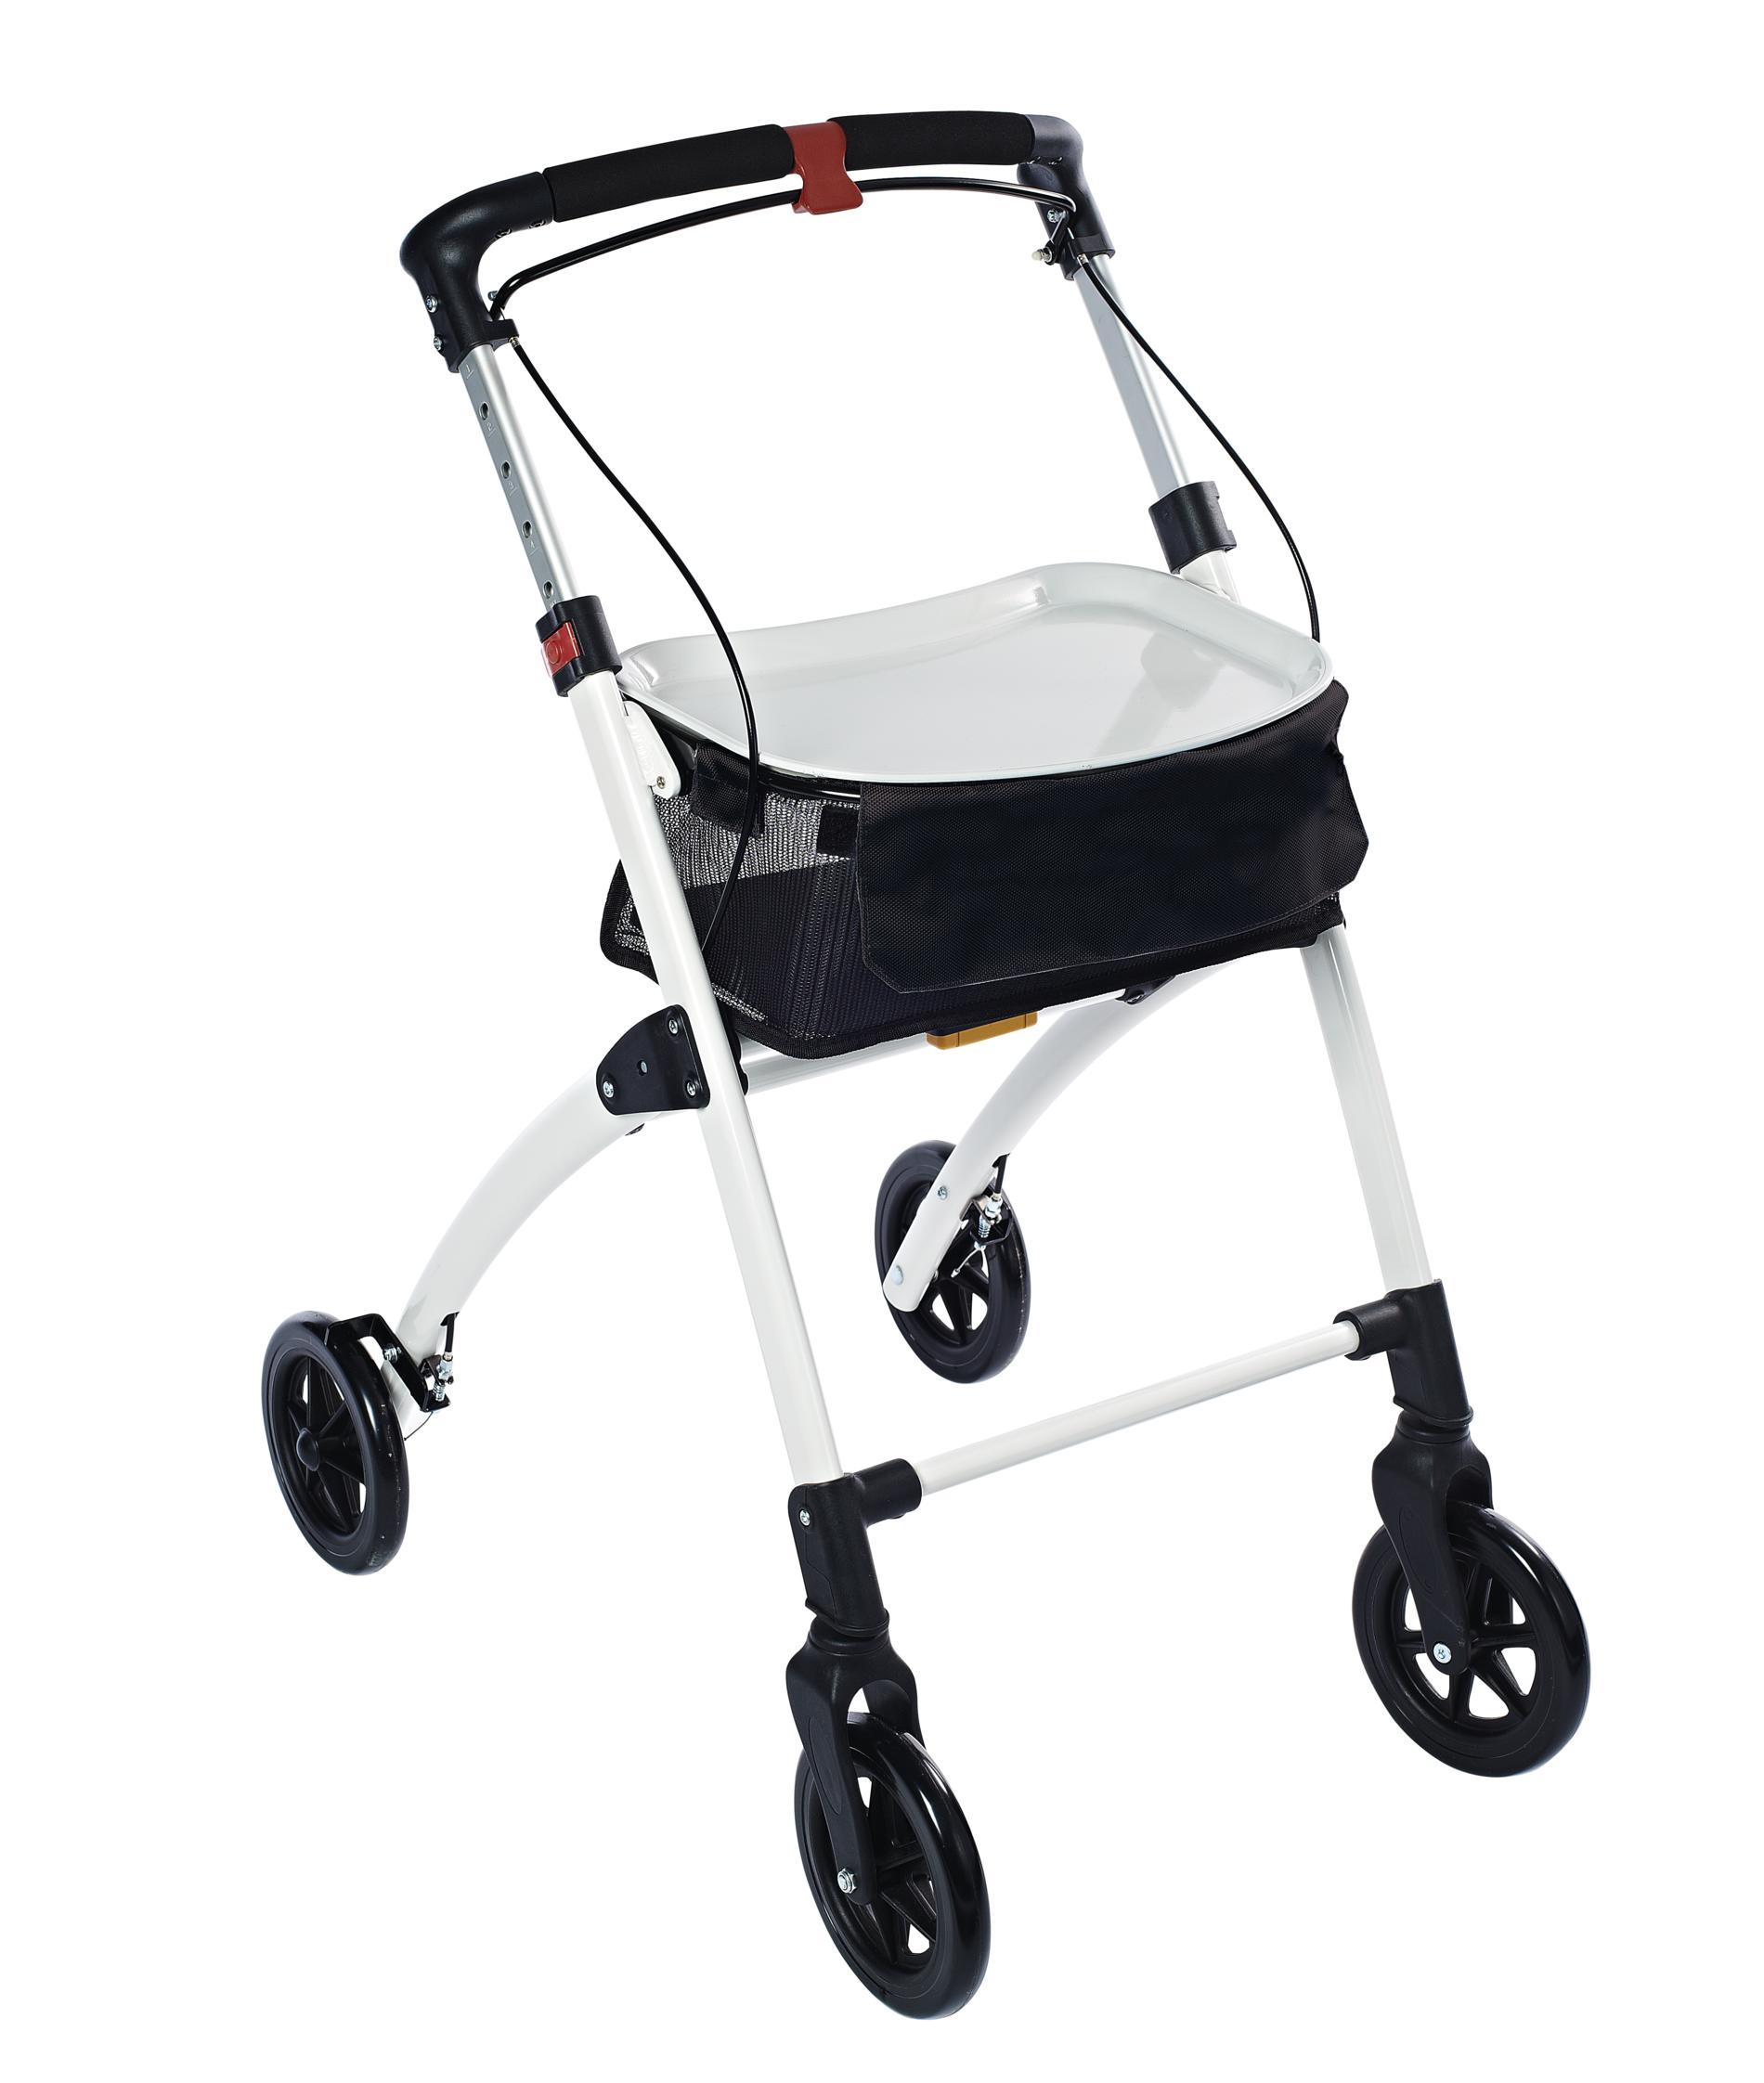 rollator at Online Safe, the and mobile with - comfortable RIDDER home Indoor Ridder everyday -